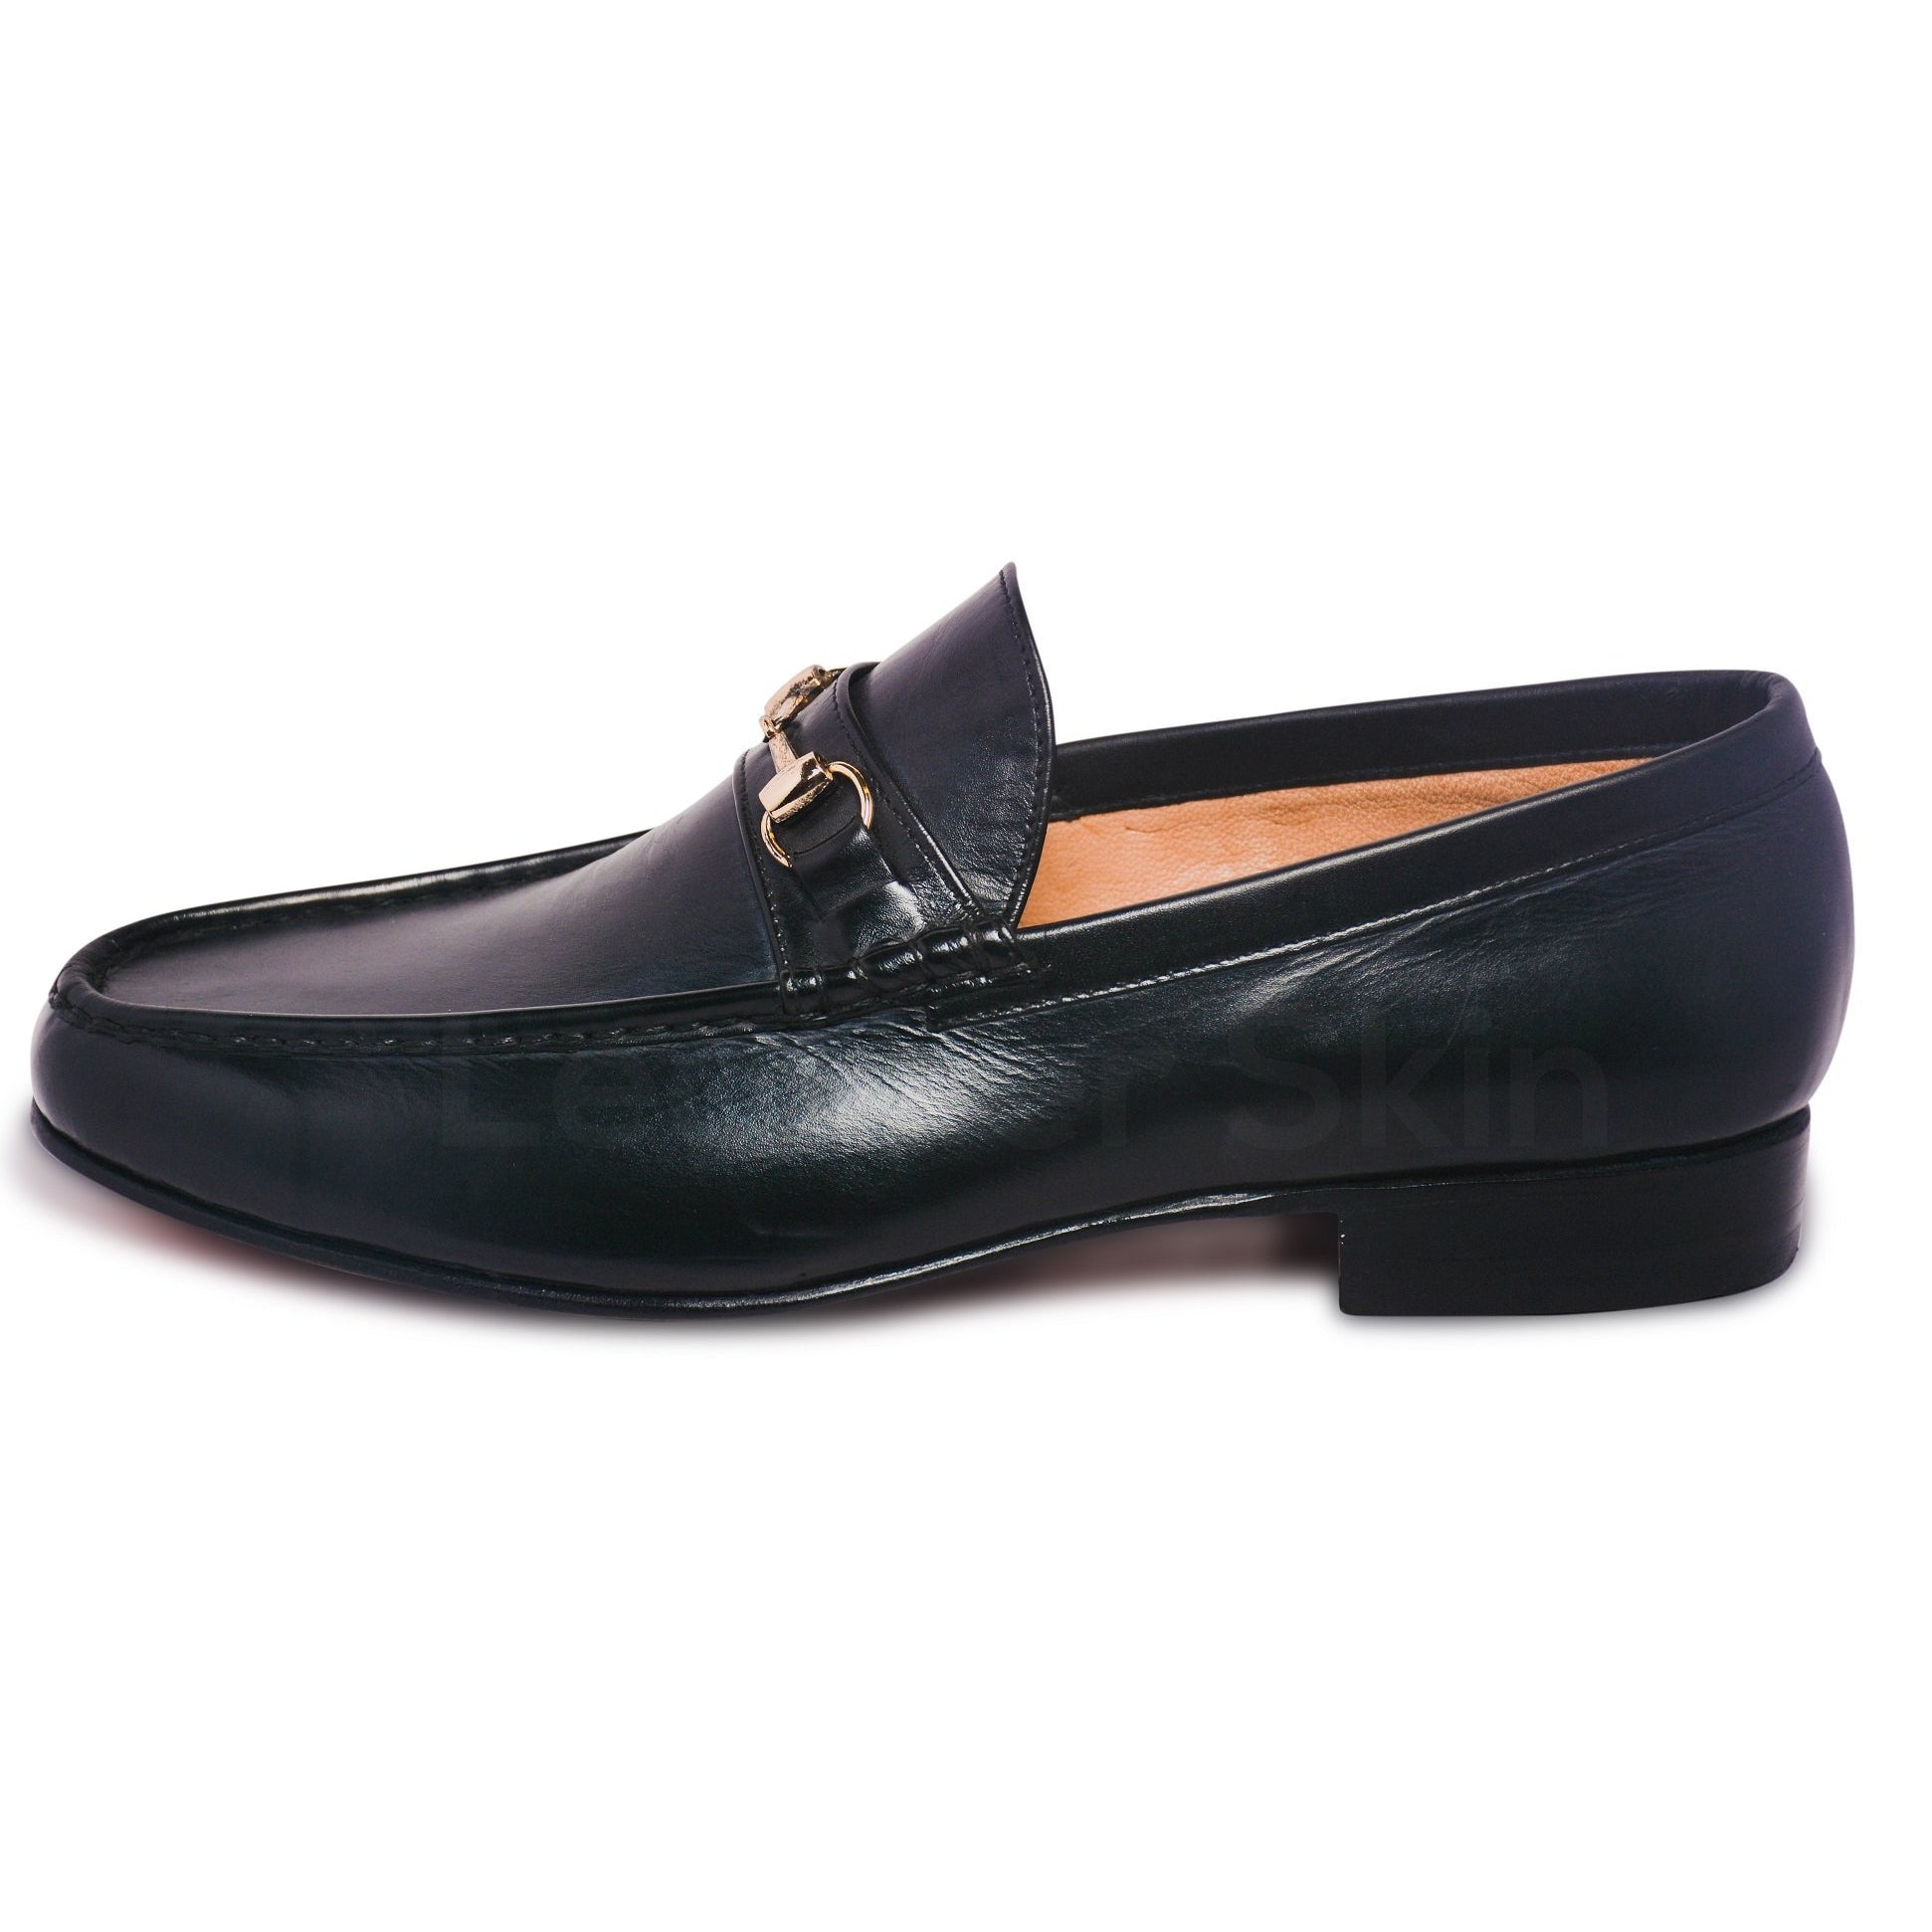 black and gold mens loafer shoes